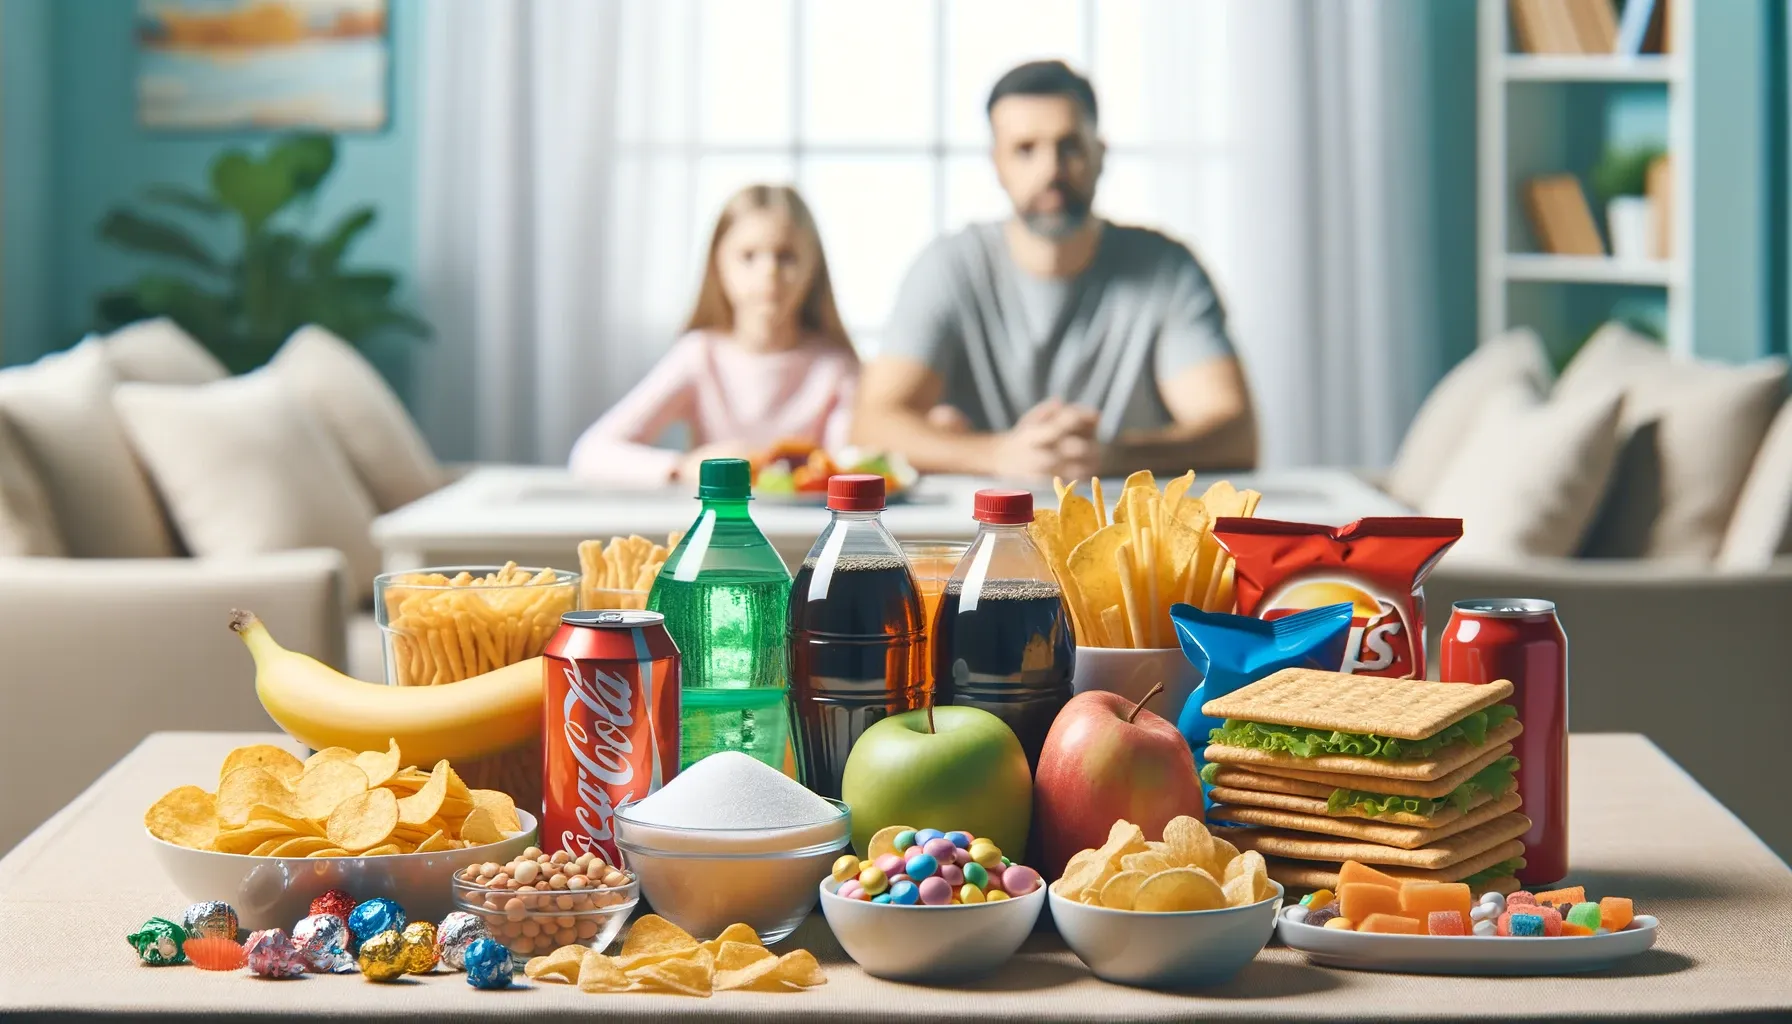 Table filled with foods high in sugar and salt with a family dining in the background.